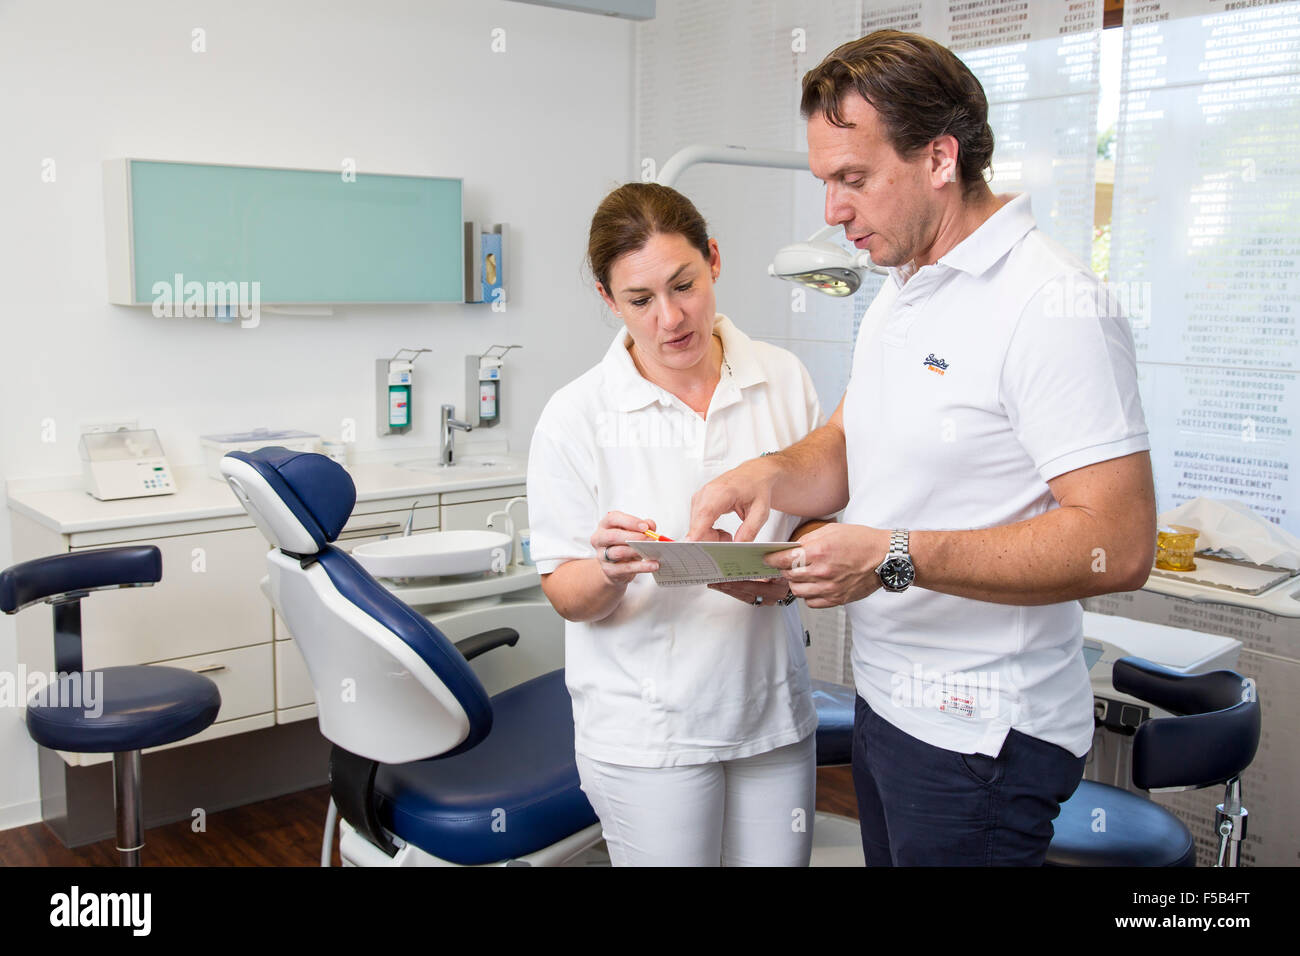 Dentist office, dentist and assistant in a meeting, checking a patient file, Stock Photo